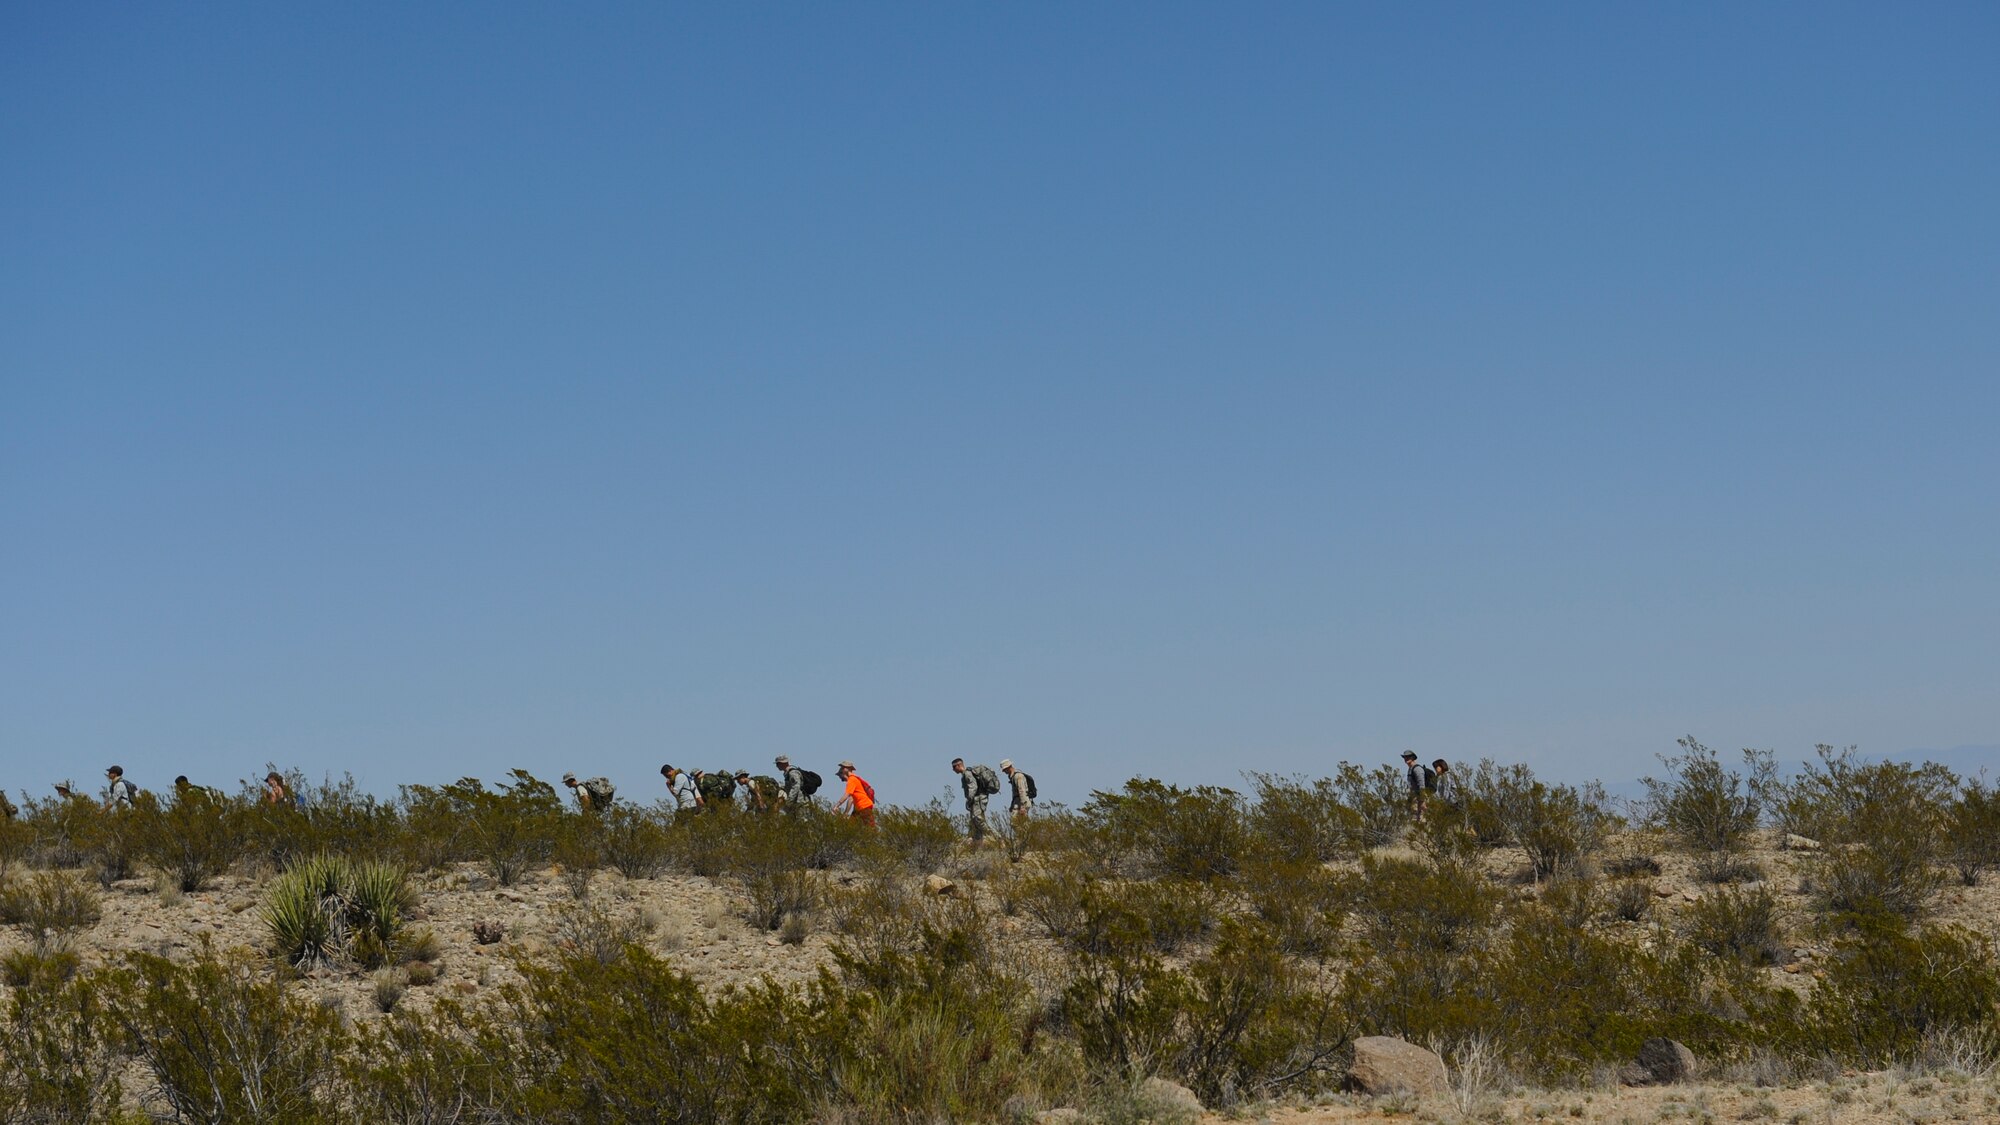 Participants of the 2016 Bataan Memorial Death March trek across the desert sand during their 23rd mile, March 20, 2016, at White Sands Missile Range, N.M. The march is 26.2 miles long and honors prisoners of war, survivors, and those lost during the notorious Bataan Death March in the Philippines.  (U.S. Air Force photo/Senior Airman Harry Brexel)